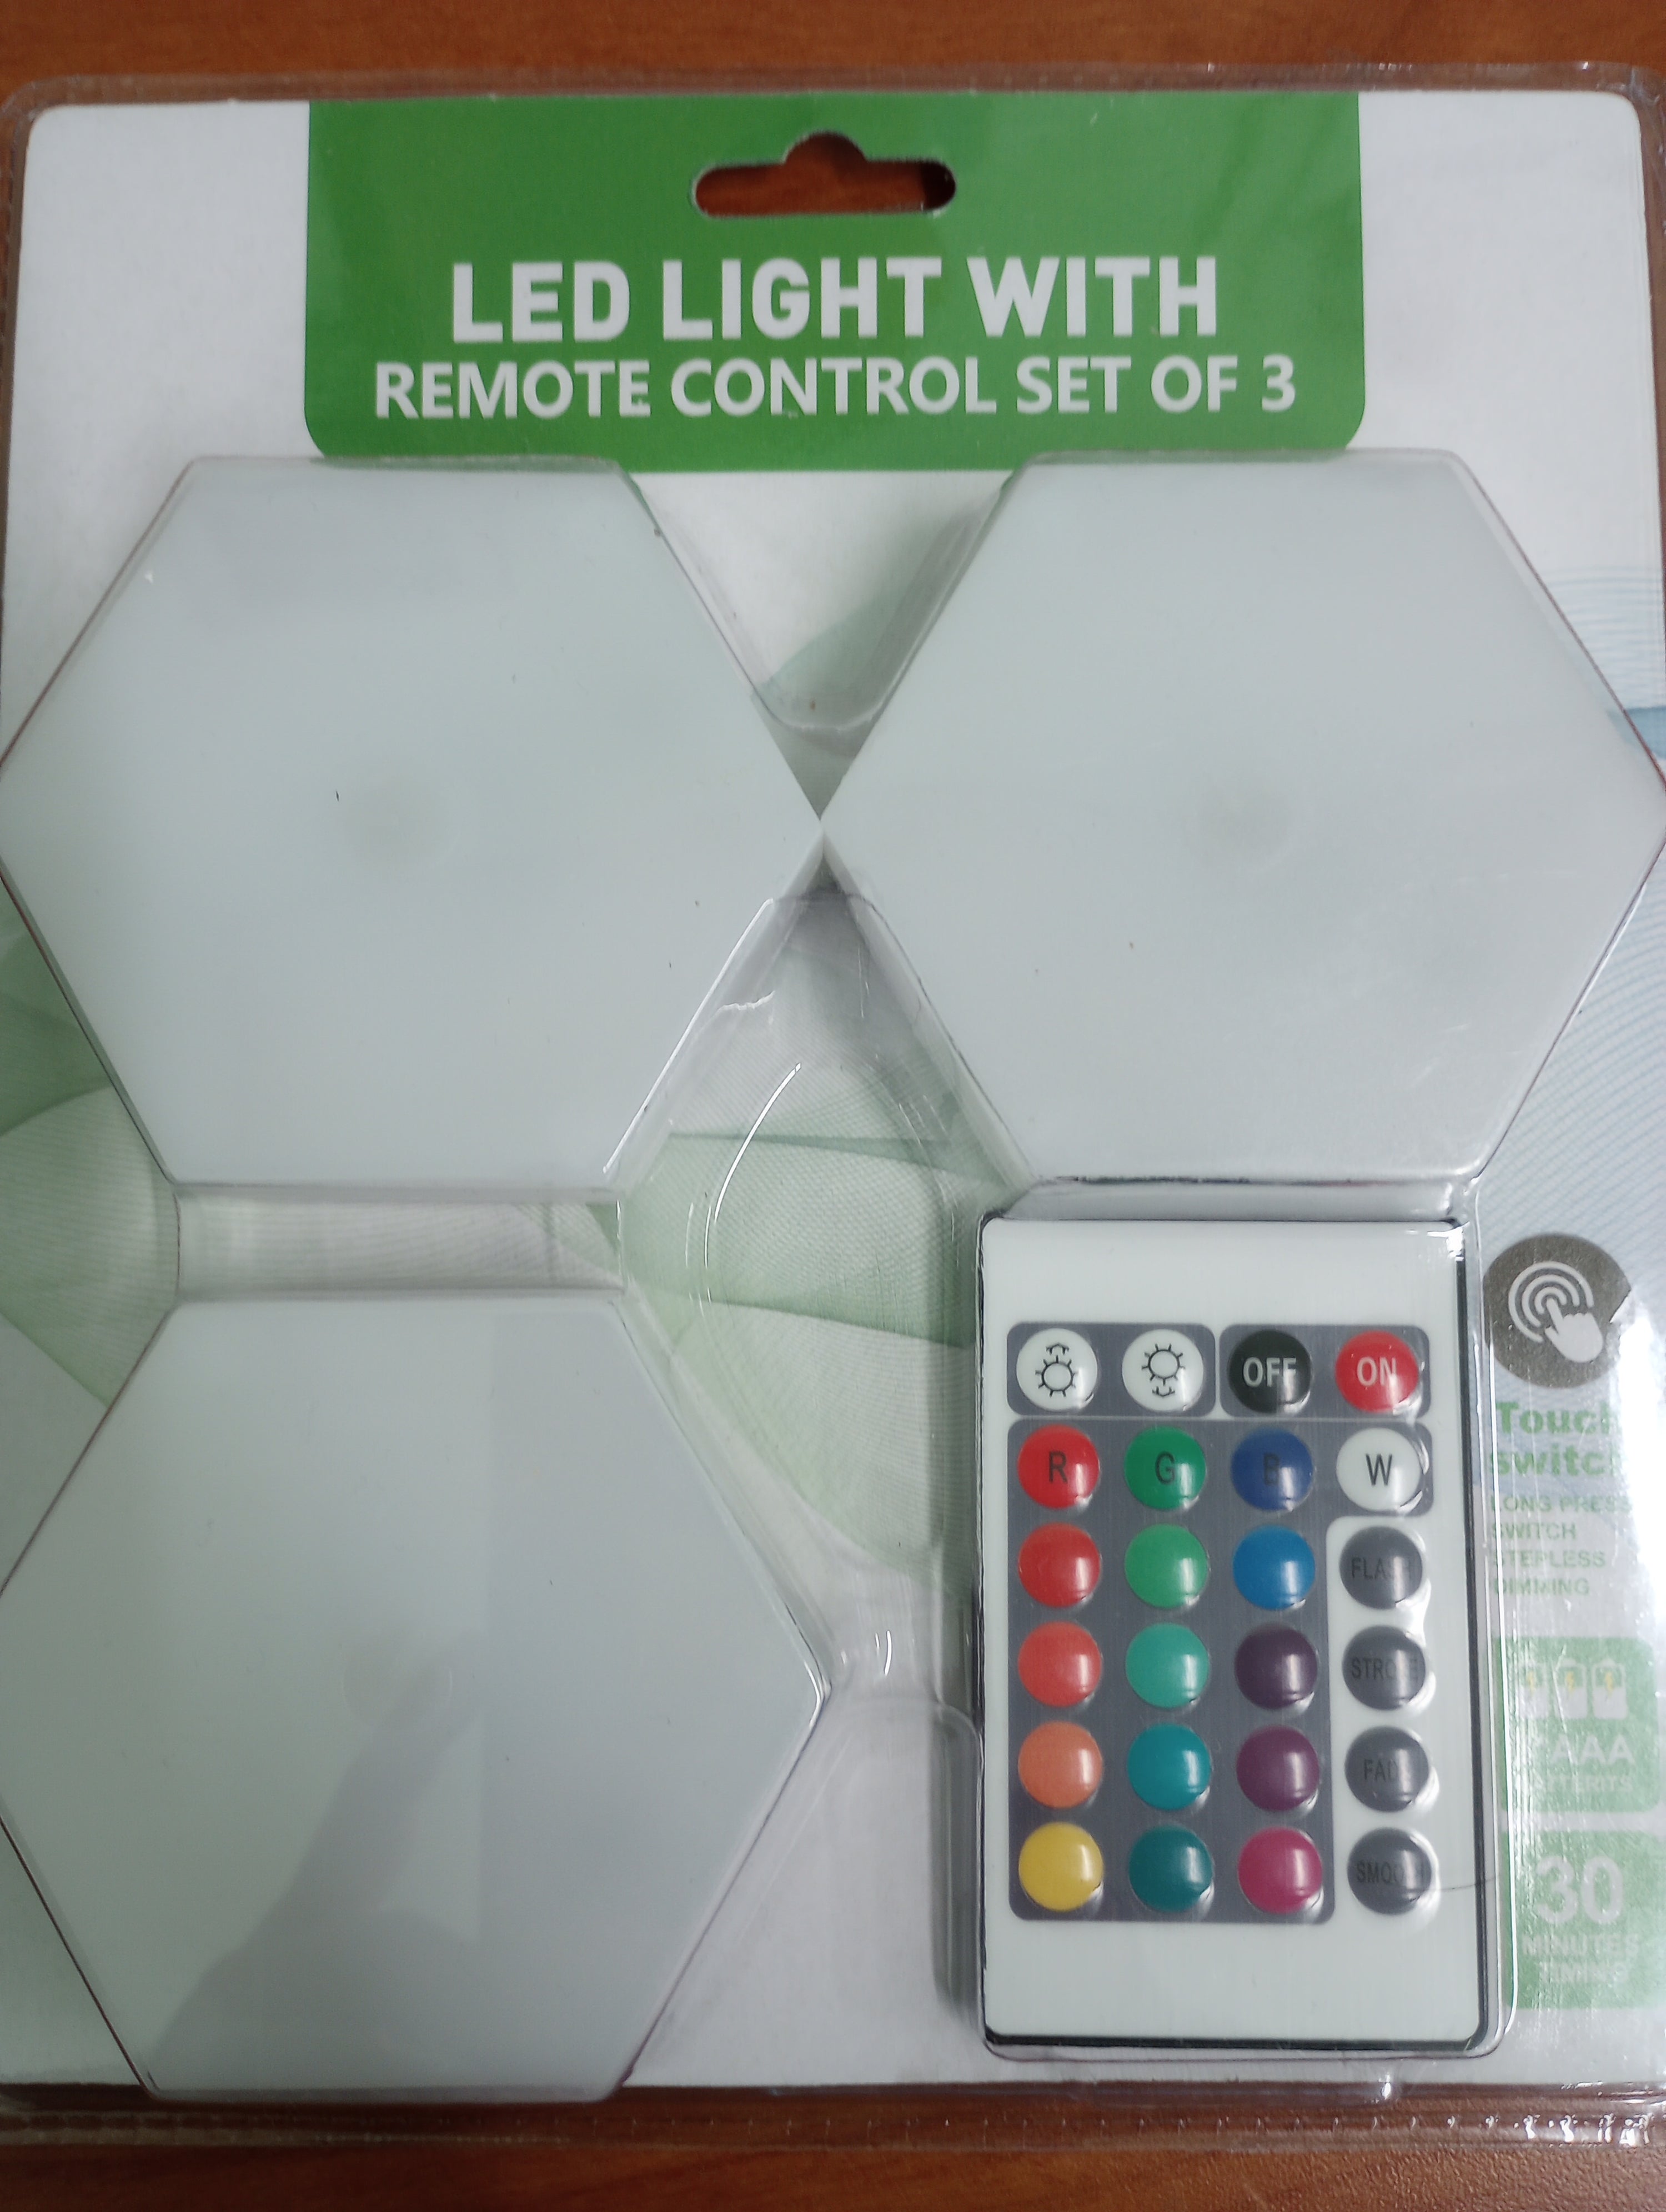 The product package for Wireless LED Lights with Remote Control (Set of 3).